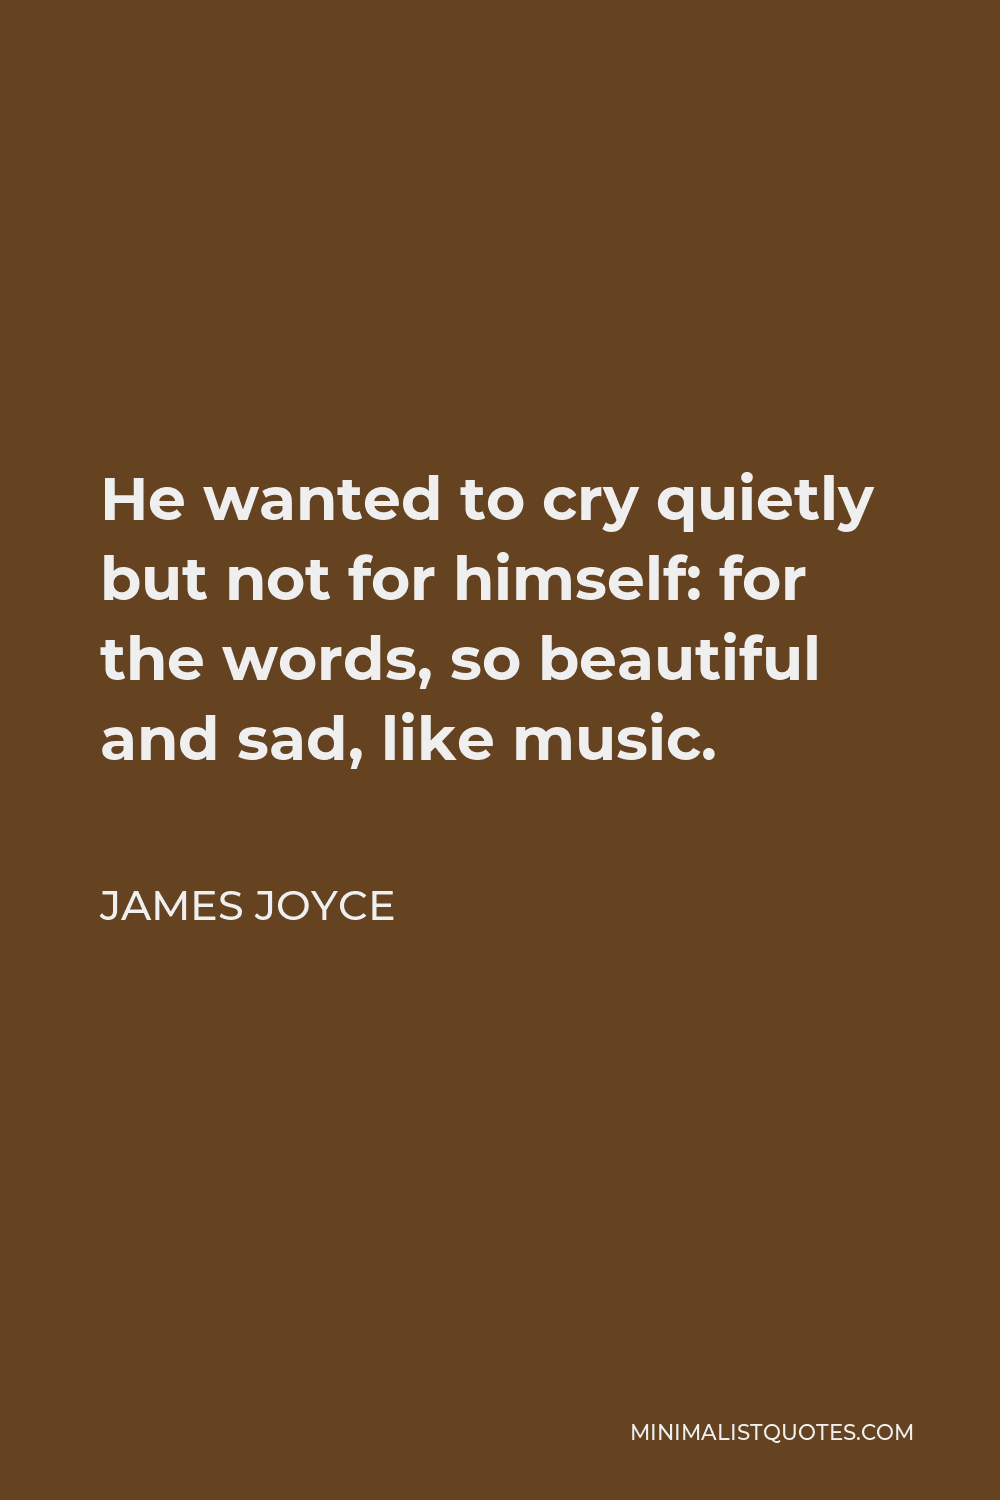 James Joyce Quote: He wanted to cry quietly but not for himself ...